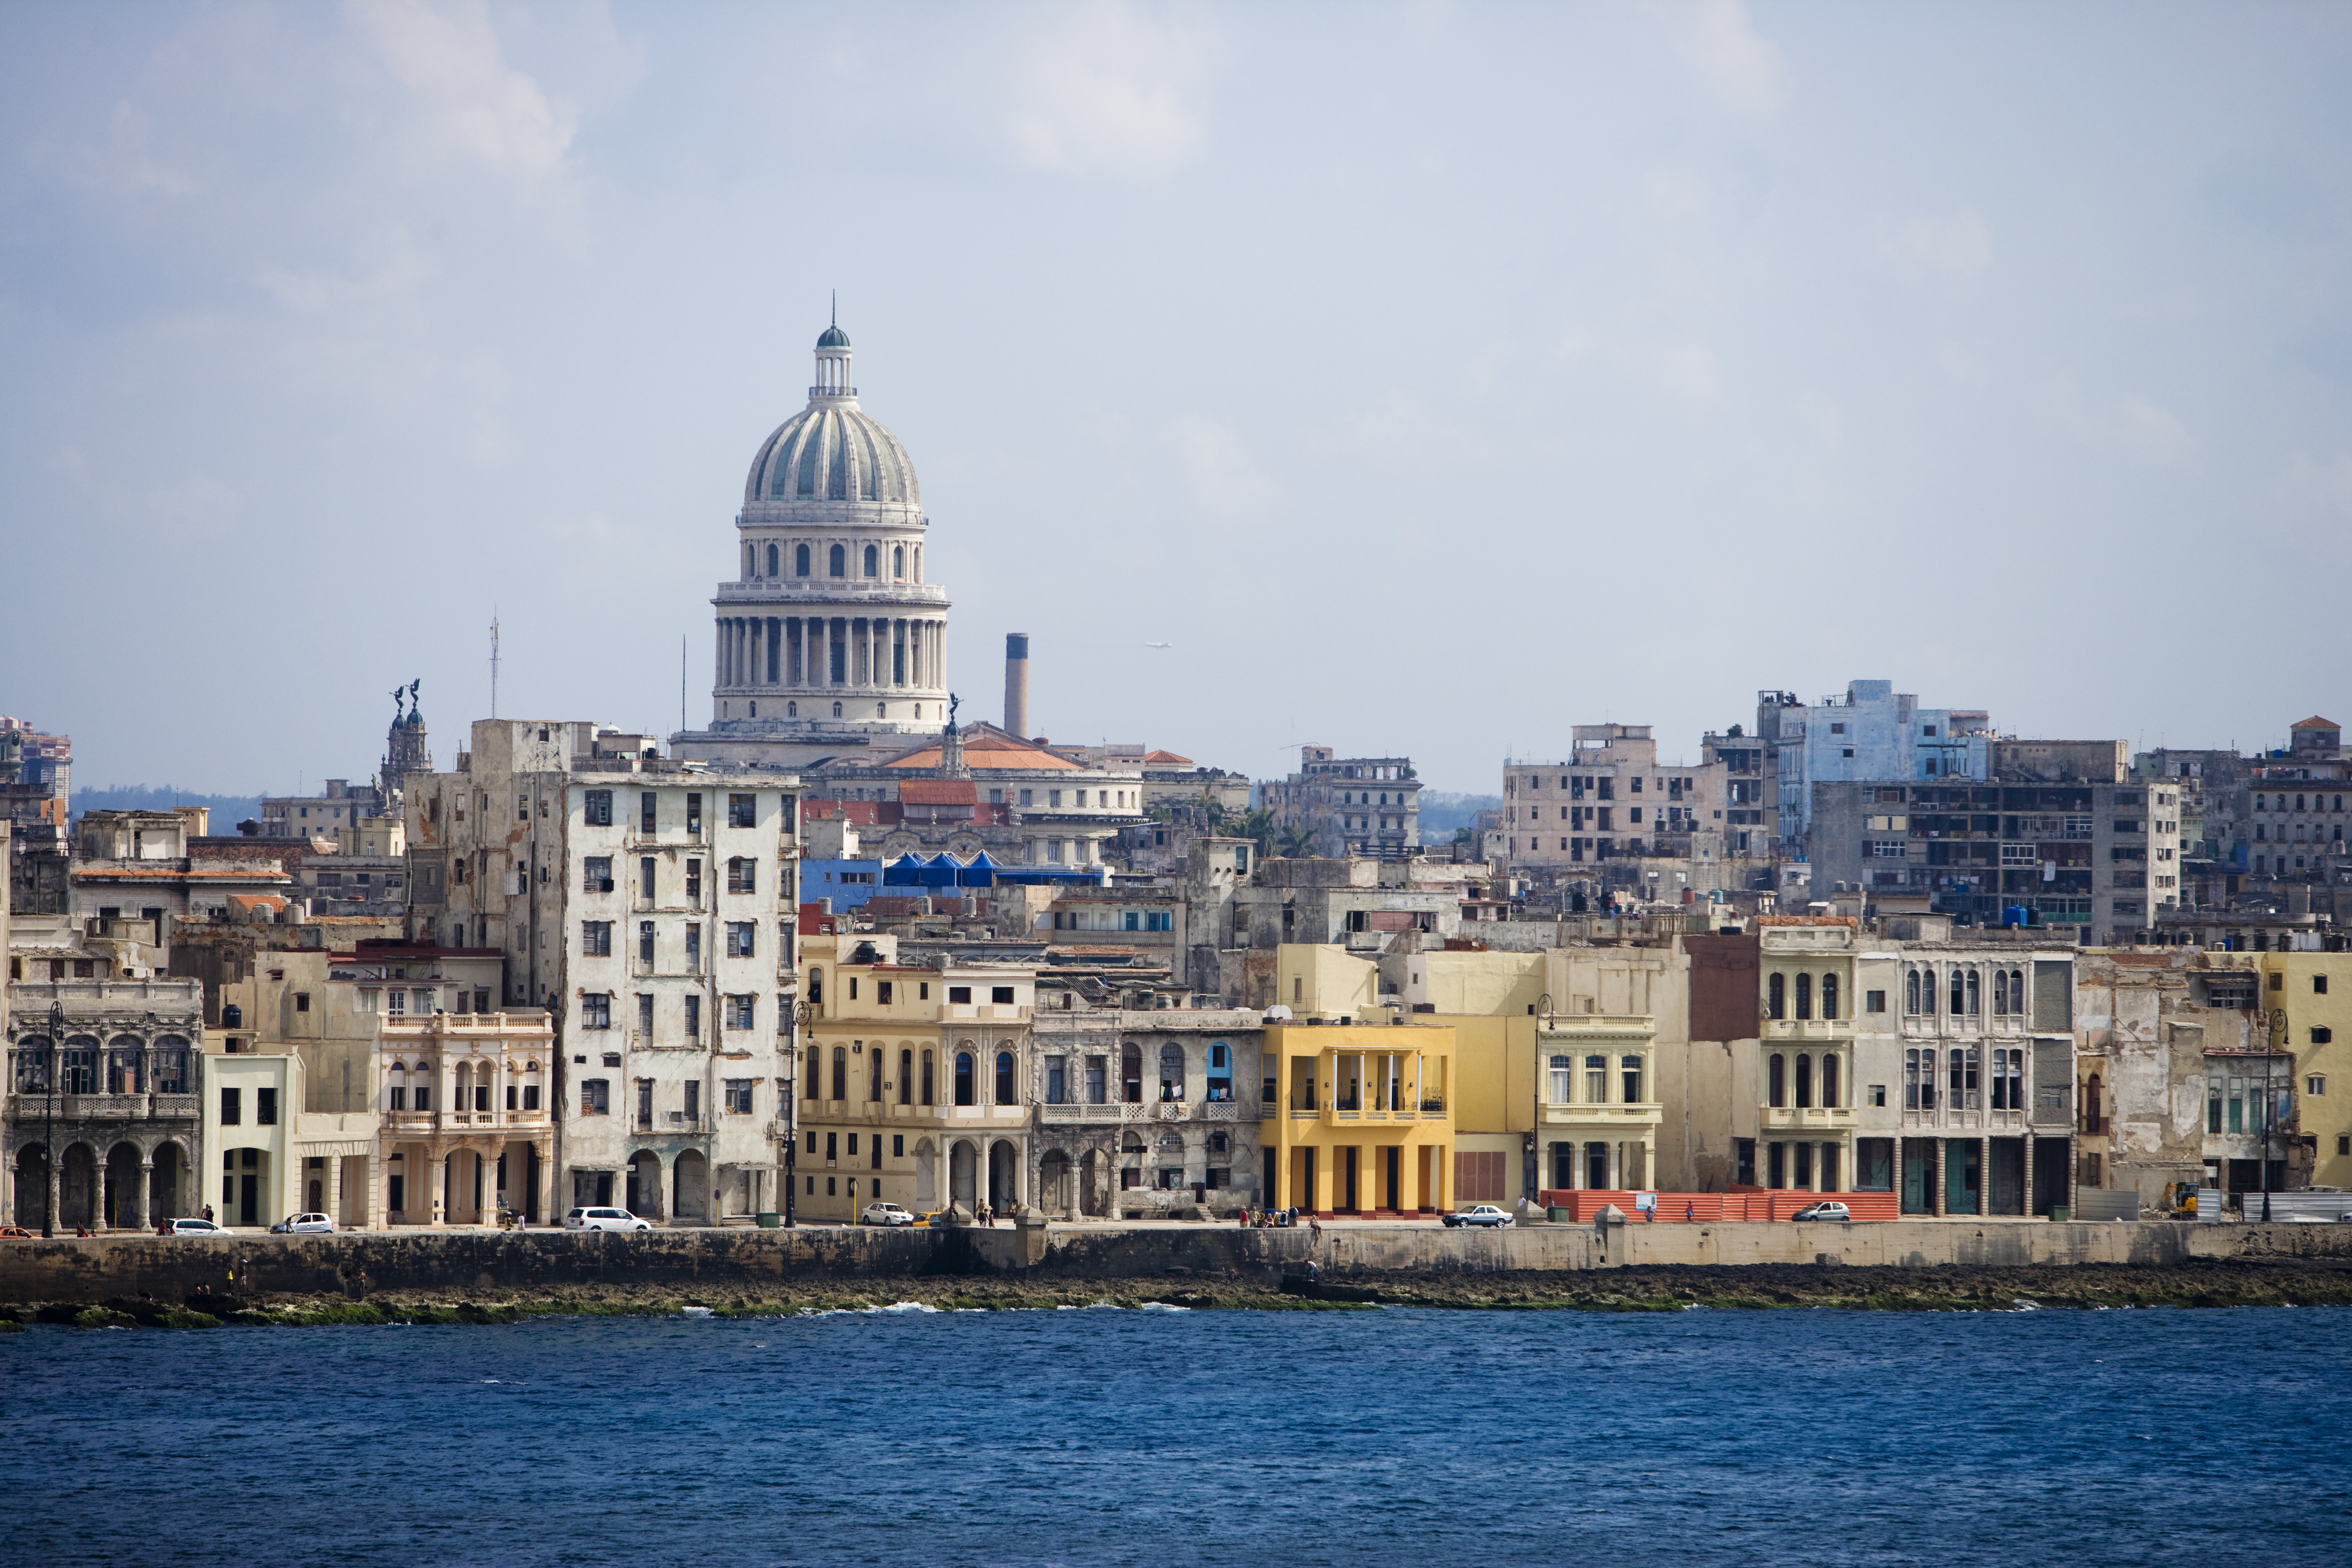 Havana shoreline with historic buildings and the Capitol dome in the background